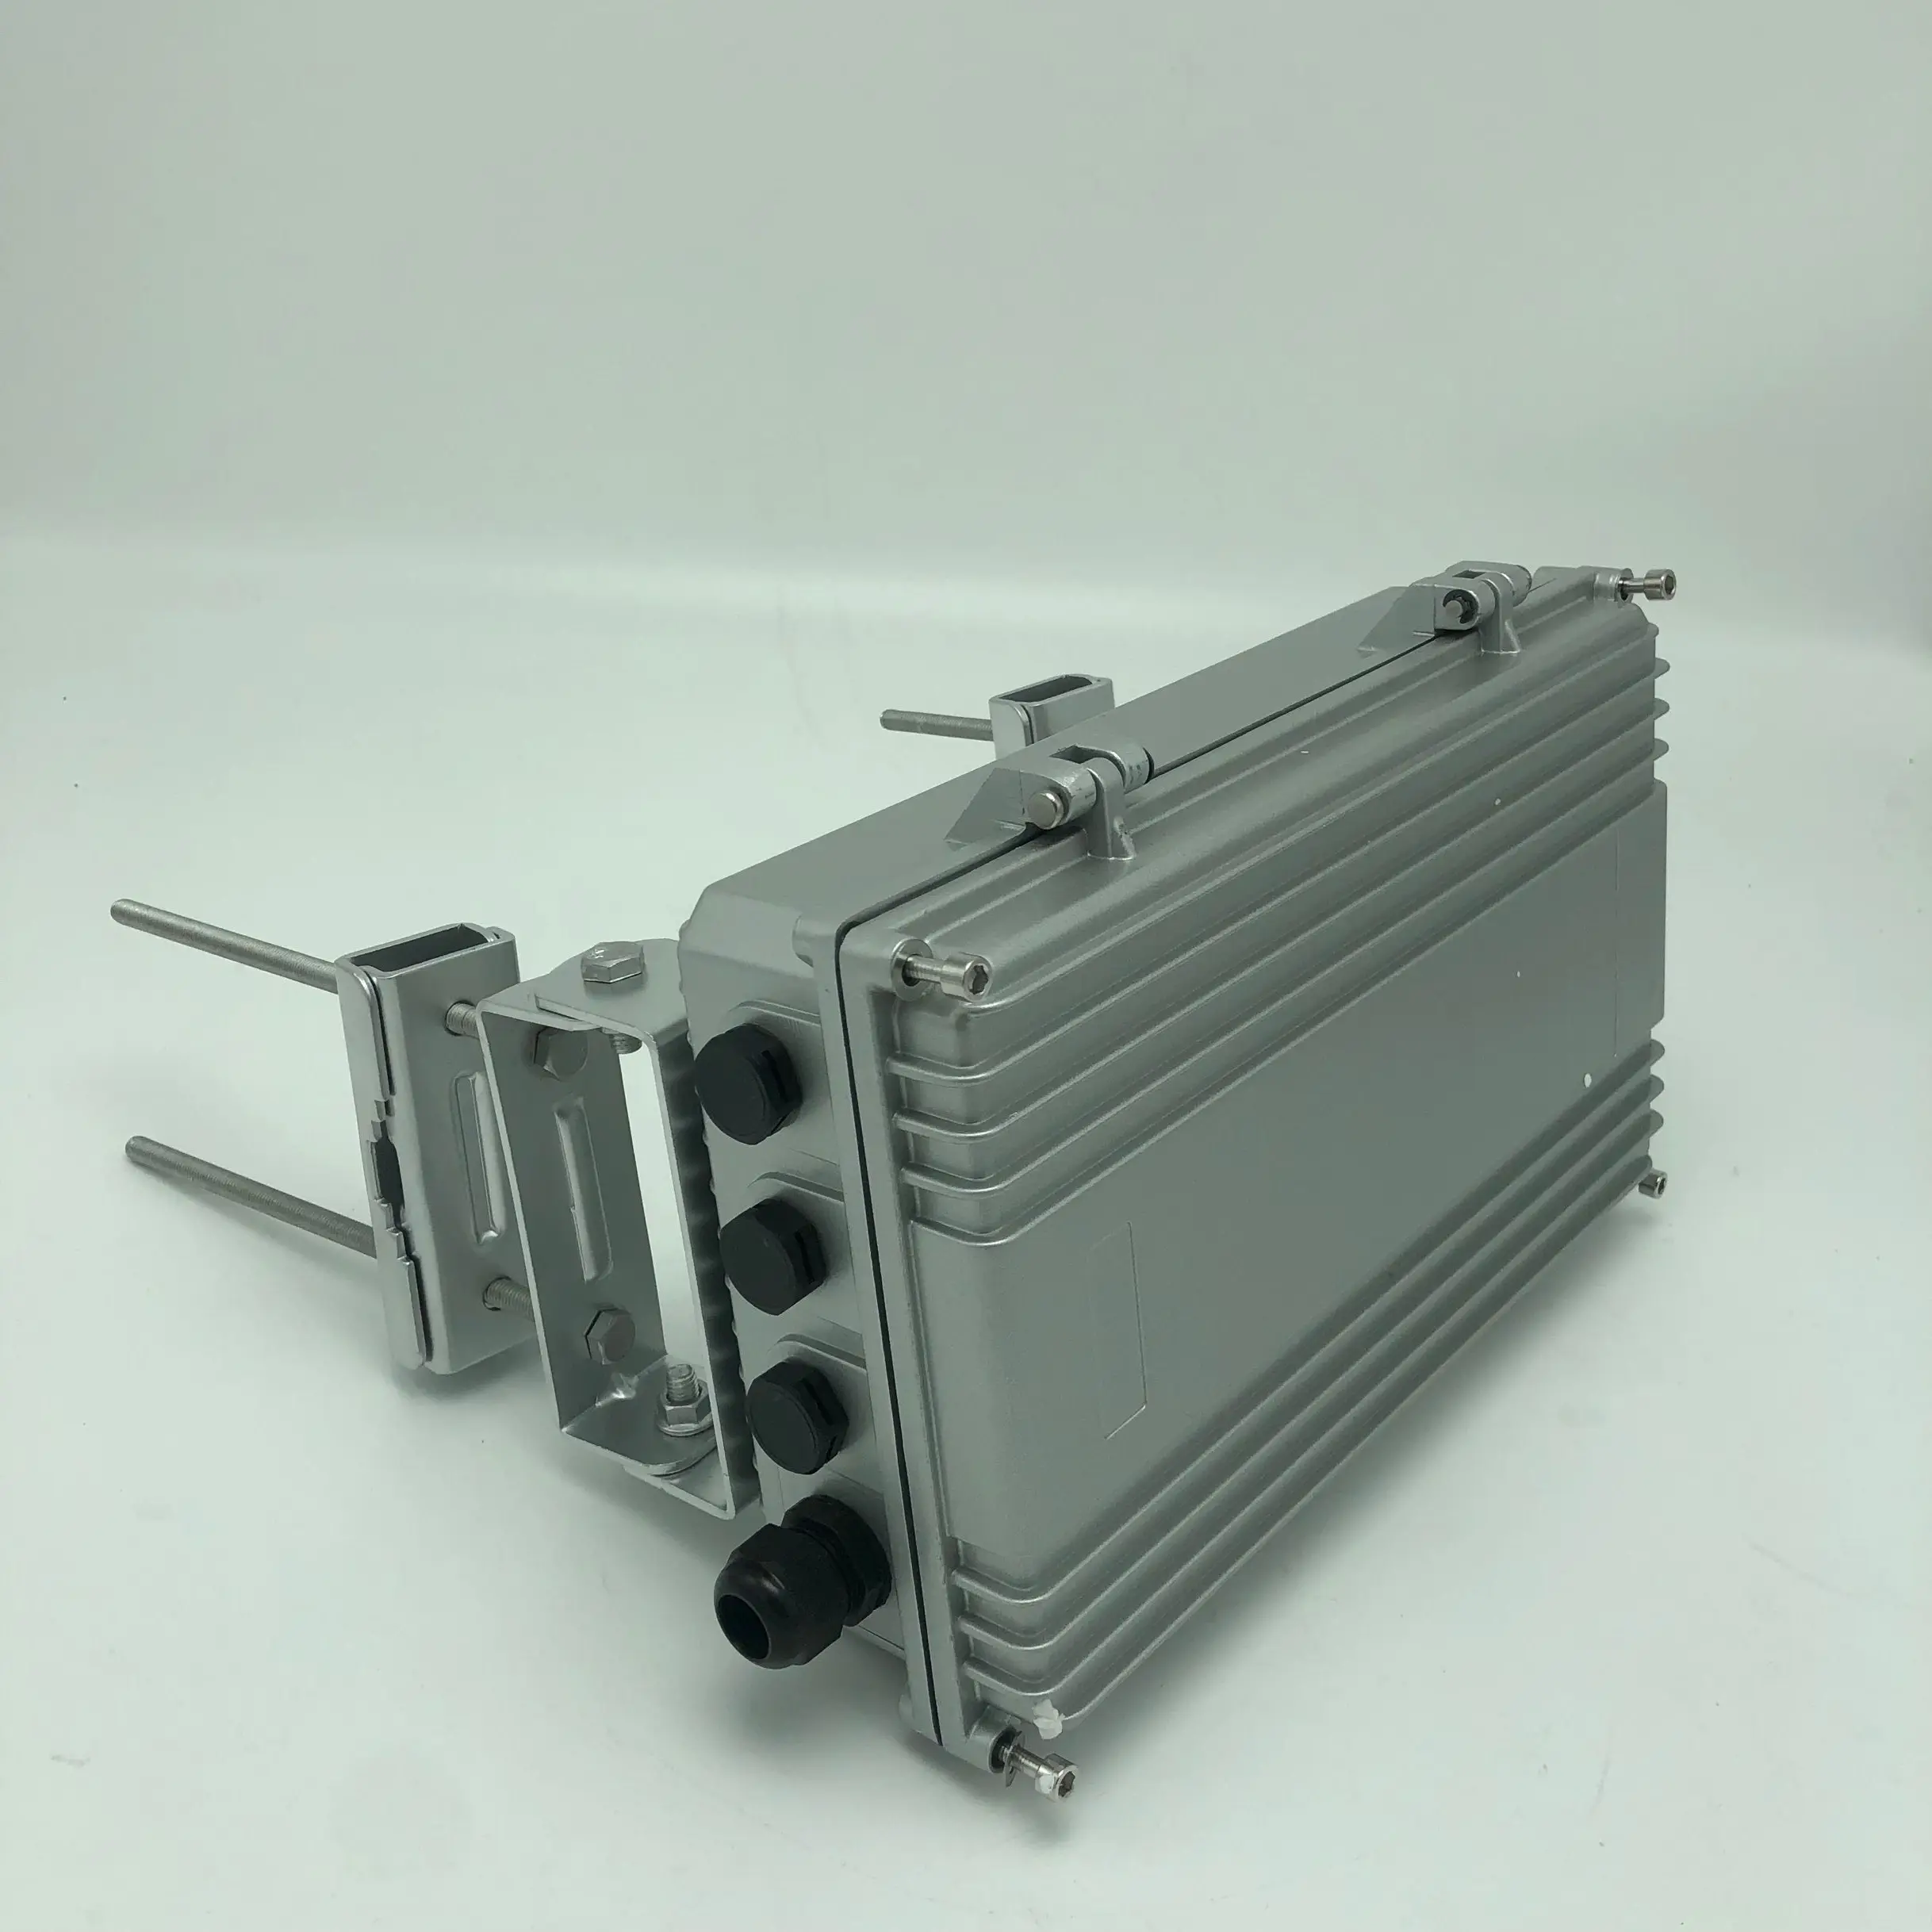 DAM021A 304*184*78mm mounting pole Waterproof Outdoor Enclosure heat sink amplifier enclosure with mounting pole